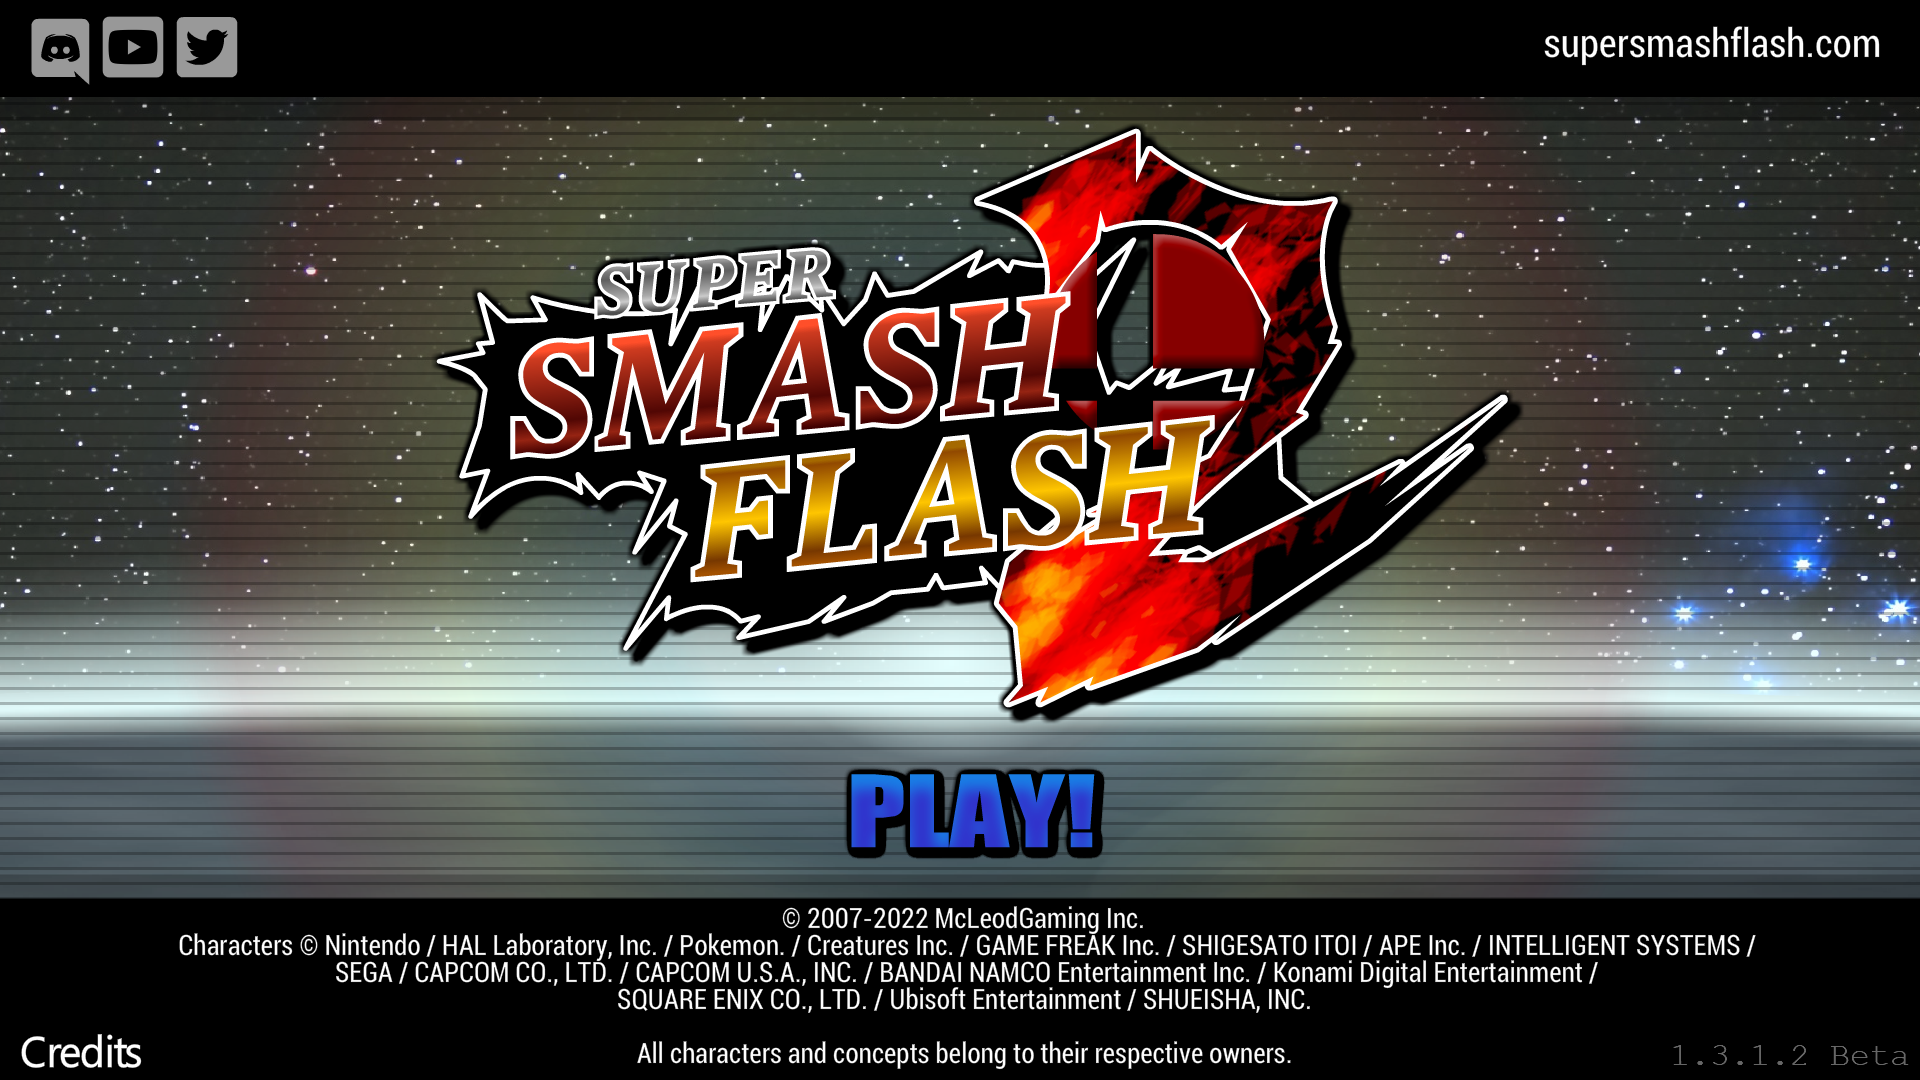 Gone In A Flash: Super Smash Flash Is Every Bit A Smash Game As The Rest